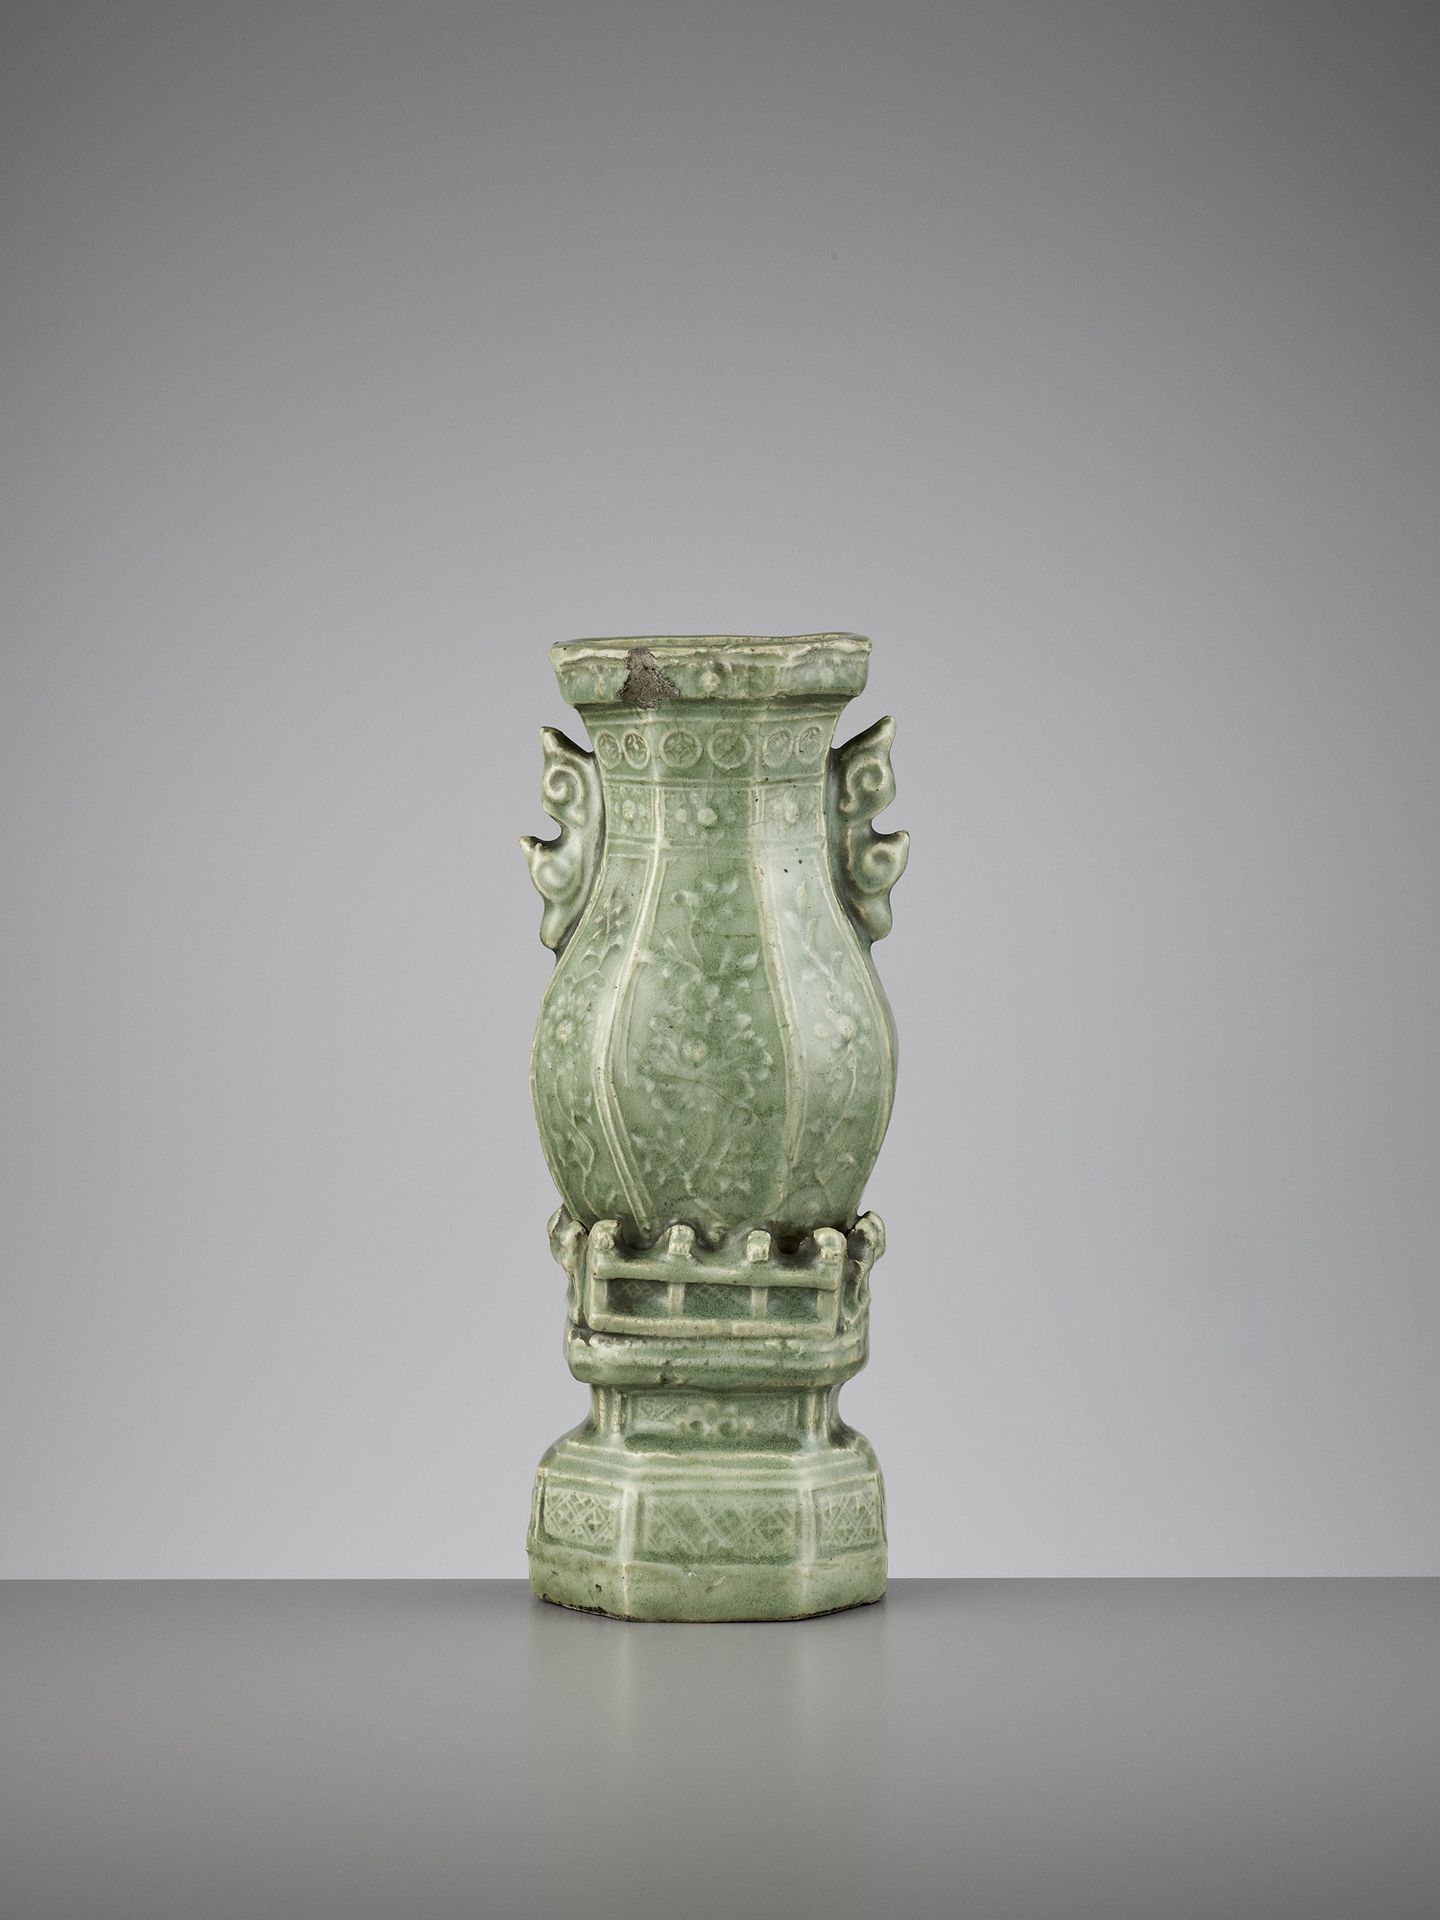 A CARVED LONGQUAN WALL VASE, MING SCHNEIDENDE LONGQUAN-WANDVASE, MING
China, 16.&hellip;